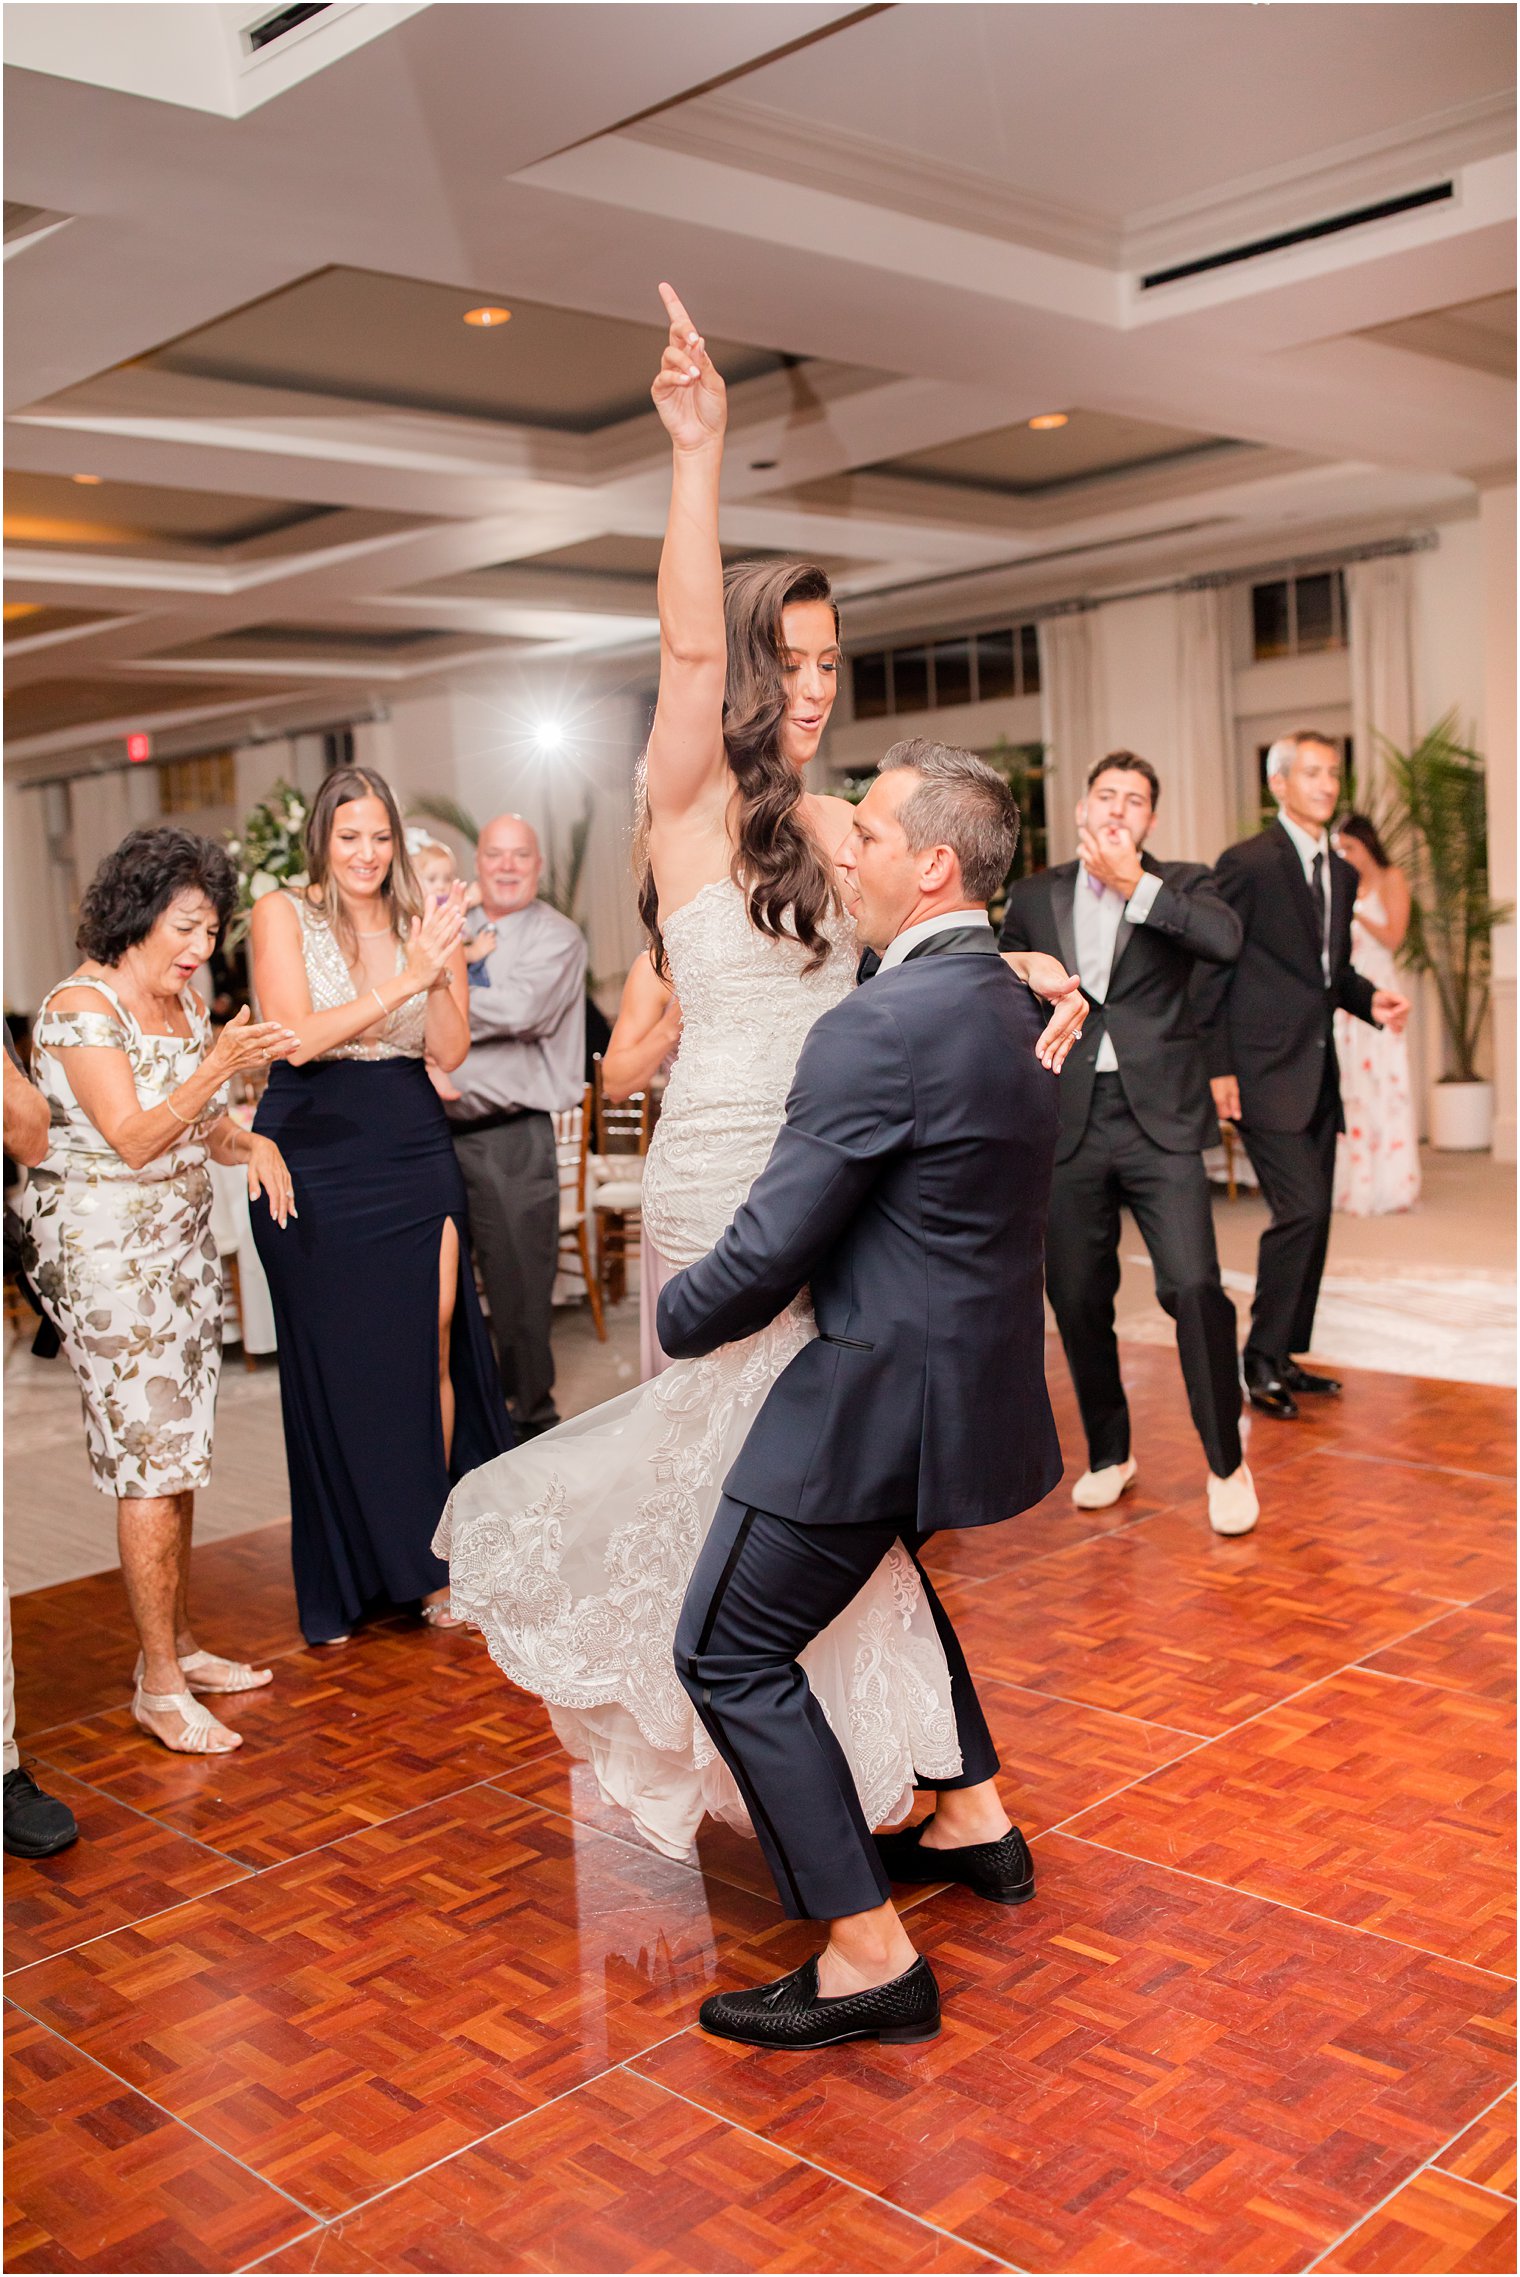 groom lifts bride up during dance at NJ wedding reception